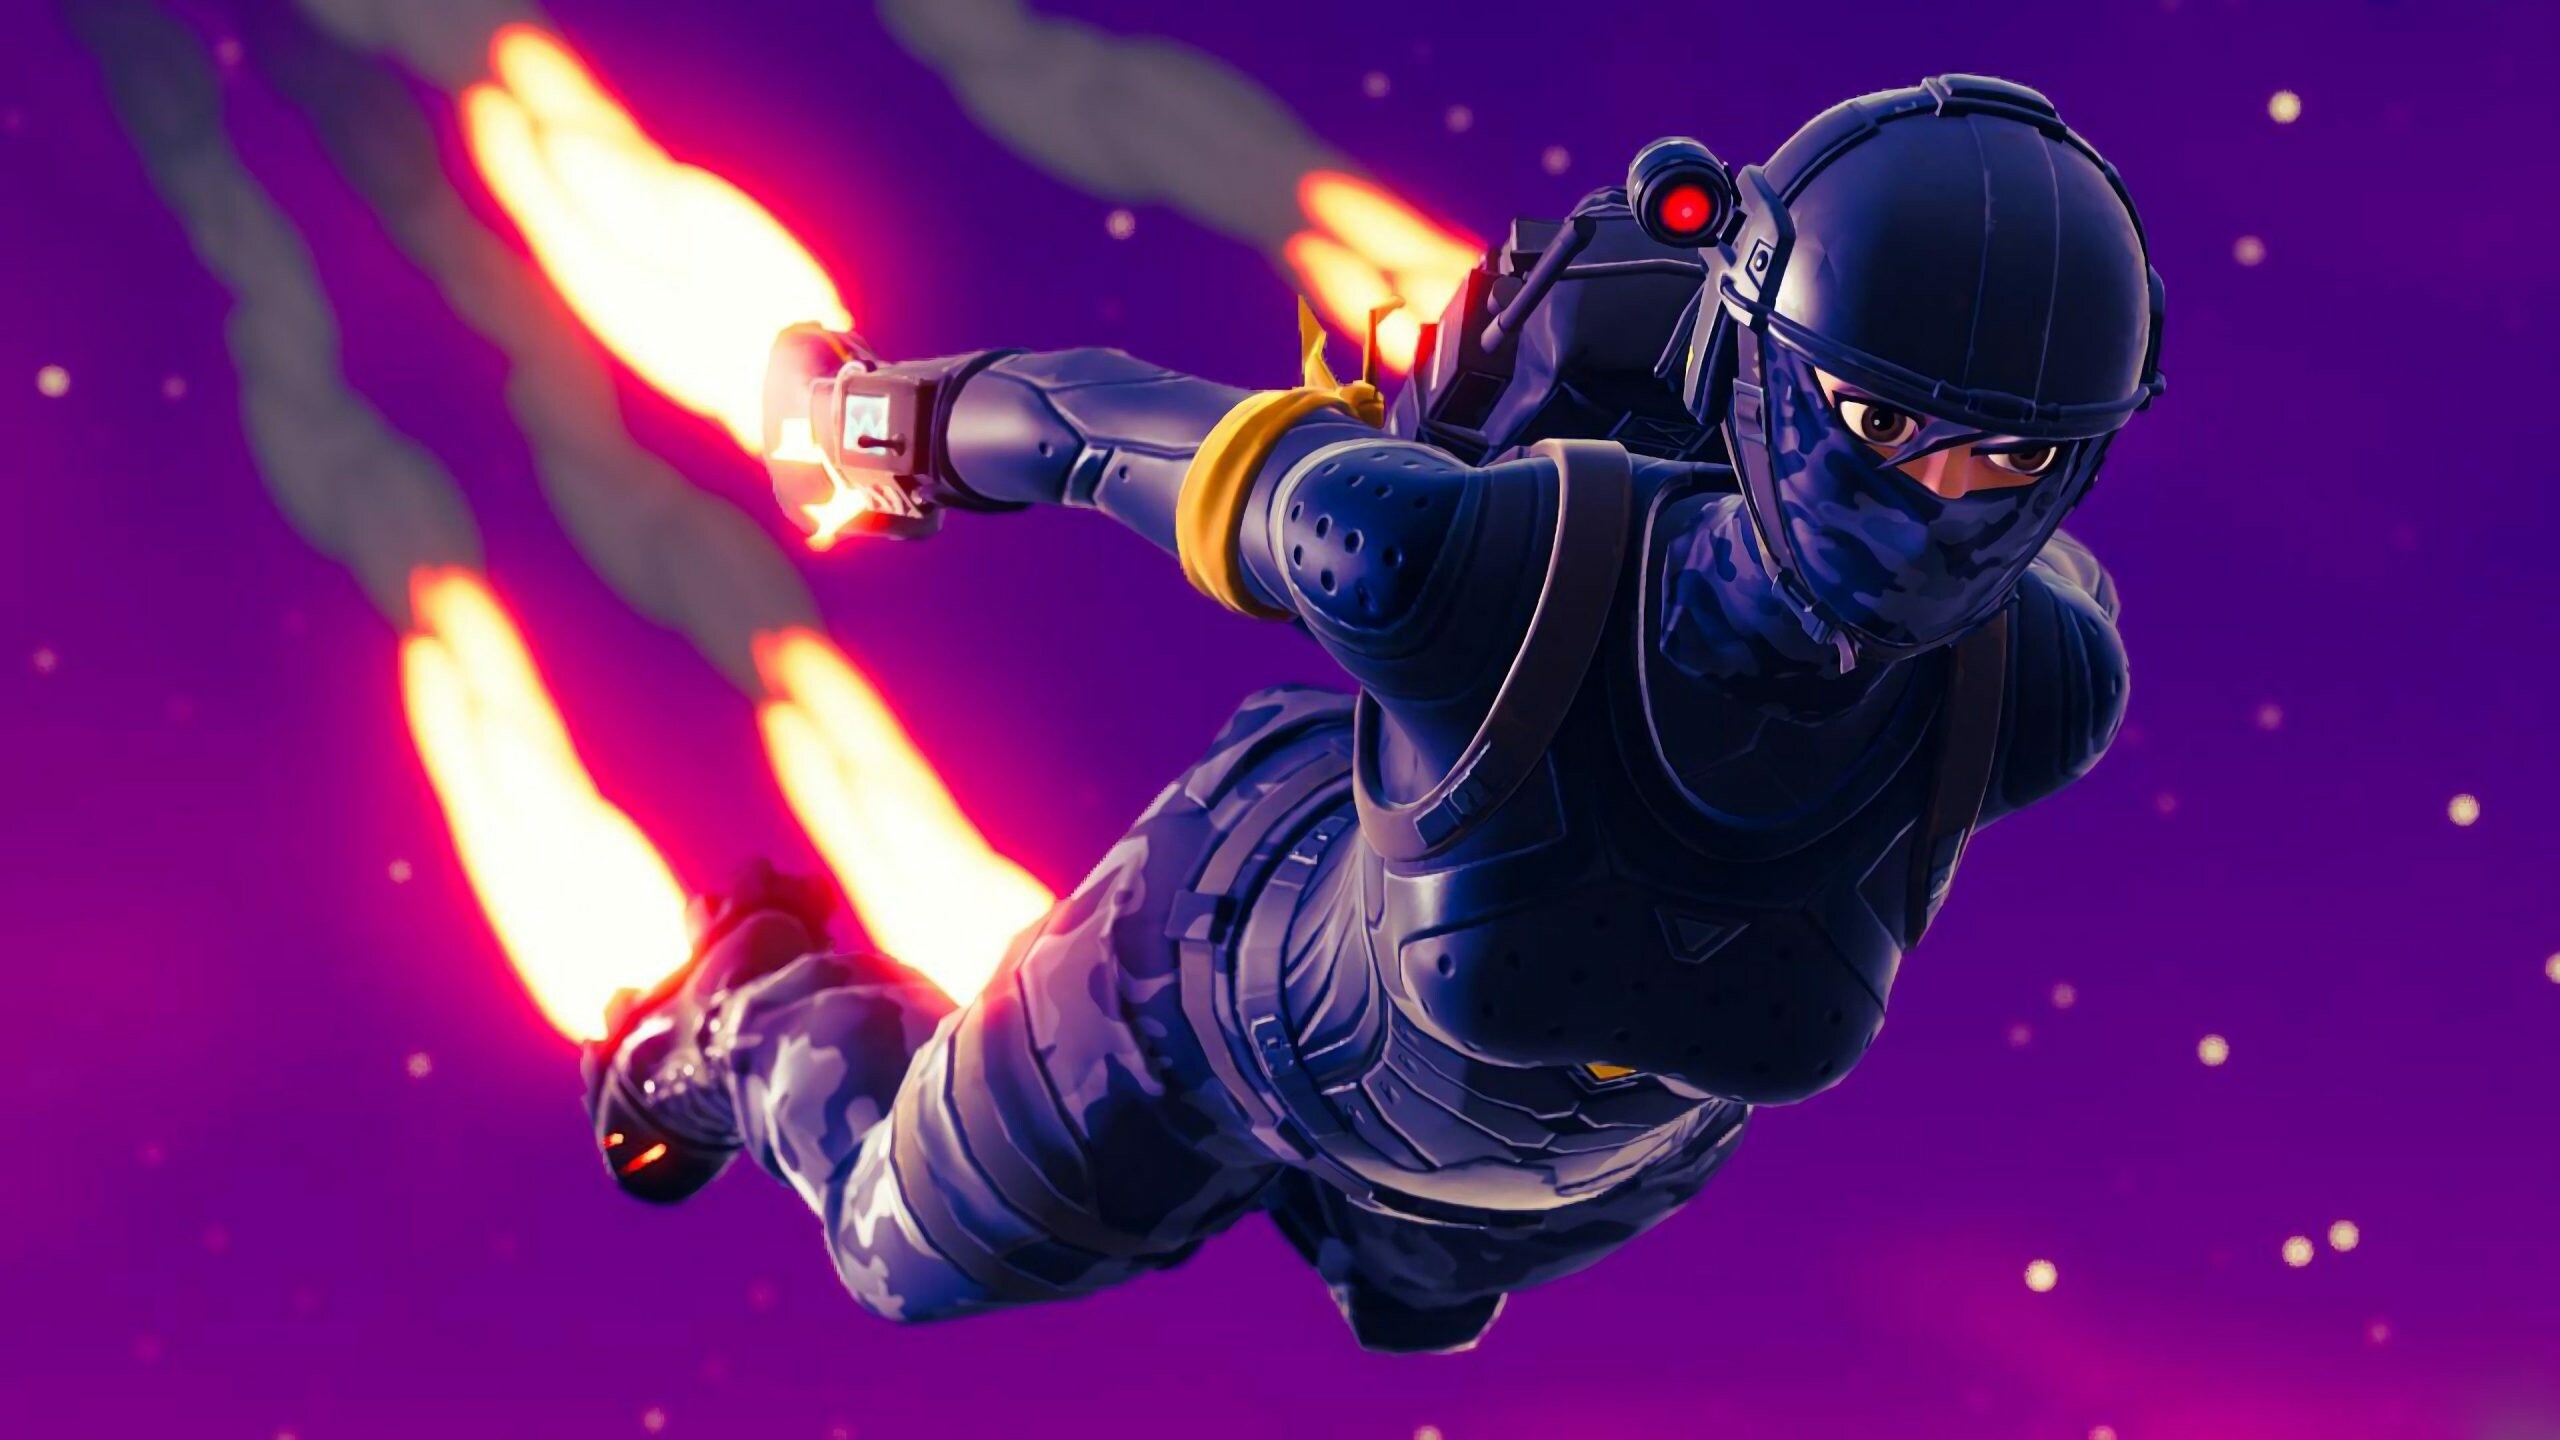 Fortnite: Released in 2017 by Epic Games, Known for its bright colors, infectious dance emotes, and use of in-game currency. 2560x1440 HD Background.